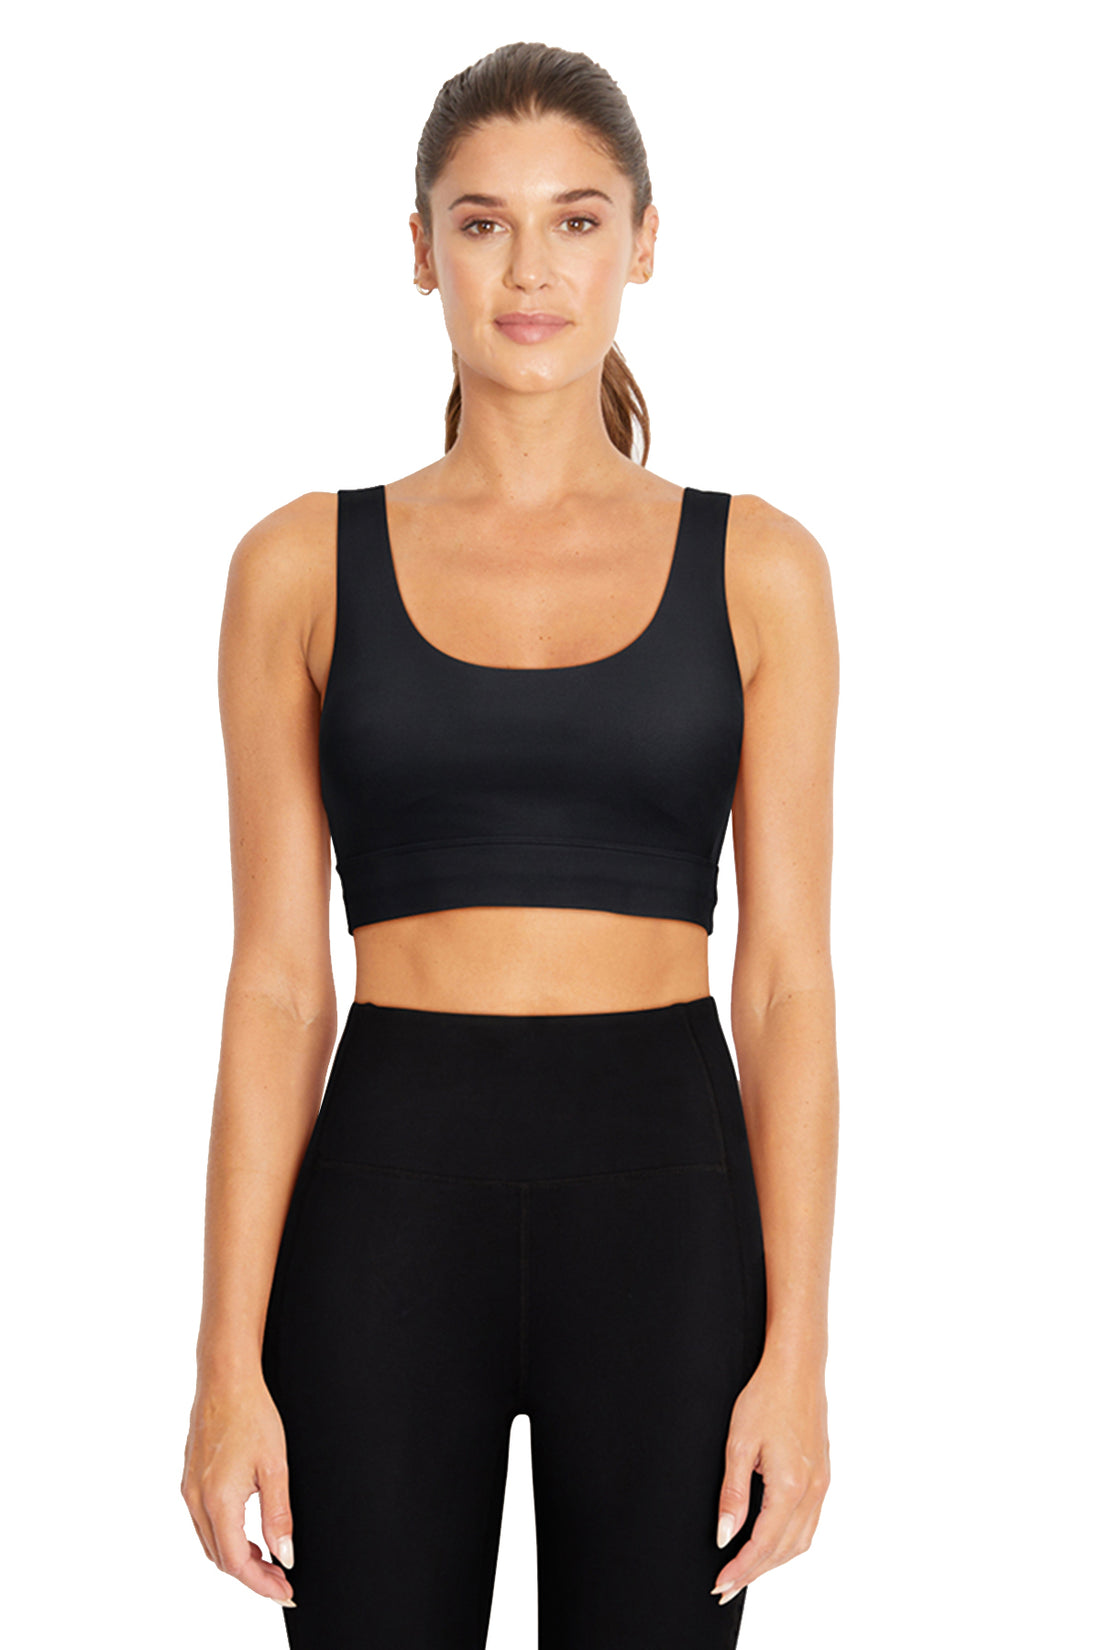 Here's the next installation of Eleanor does sports bras!! This is